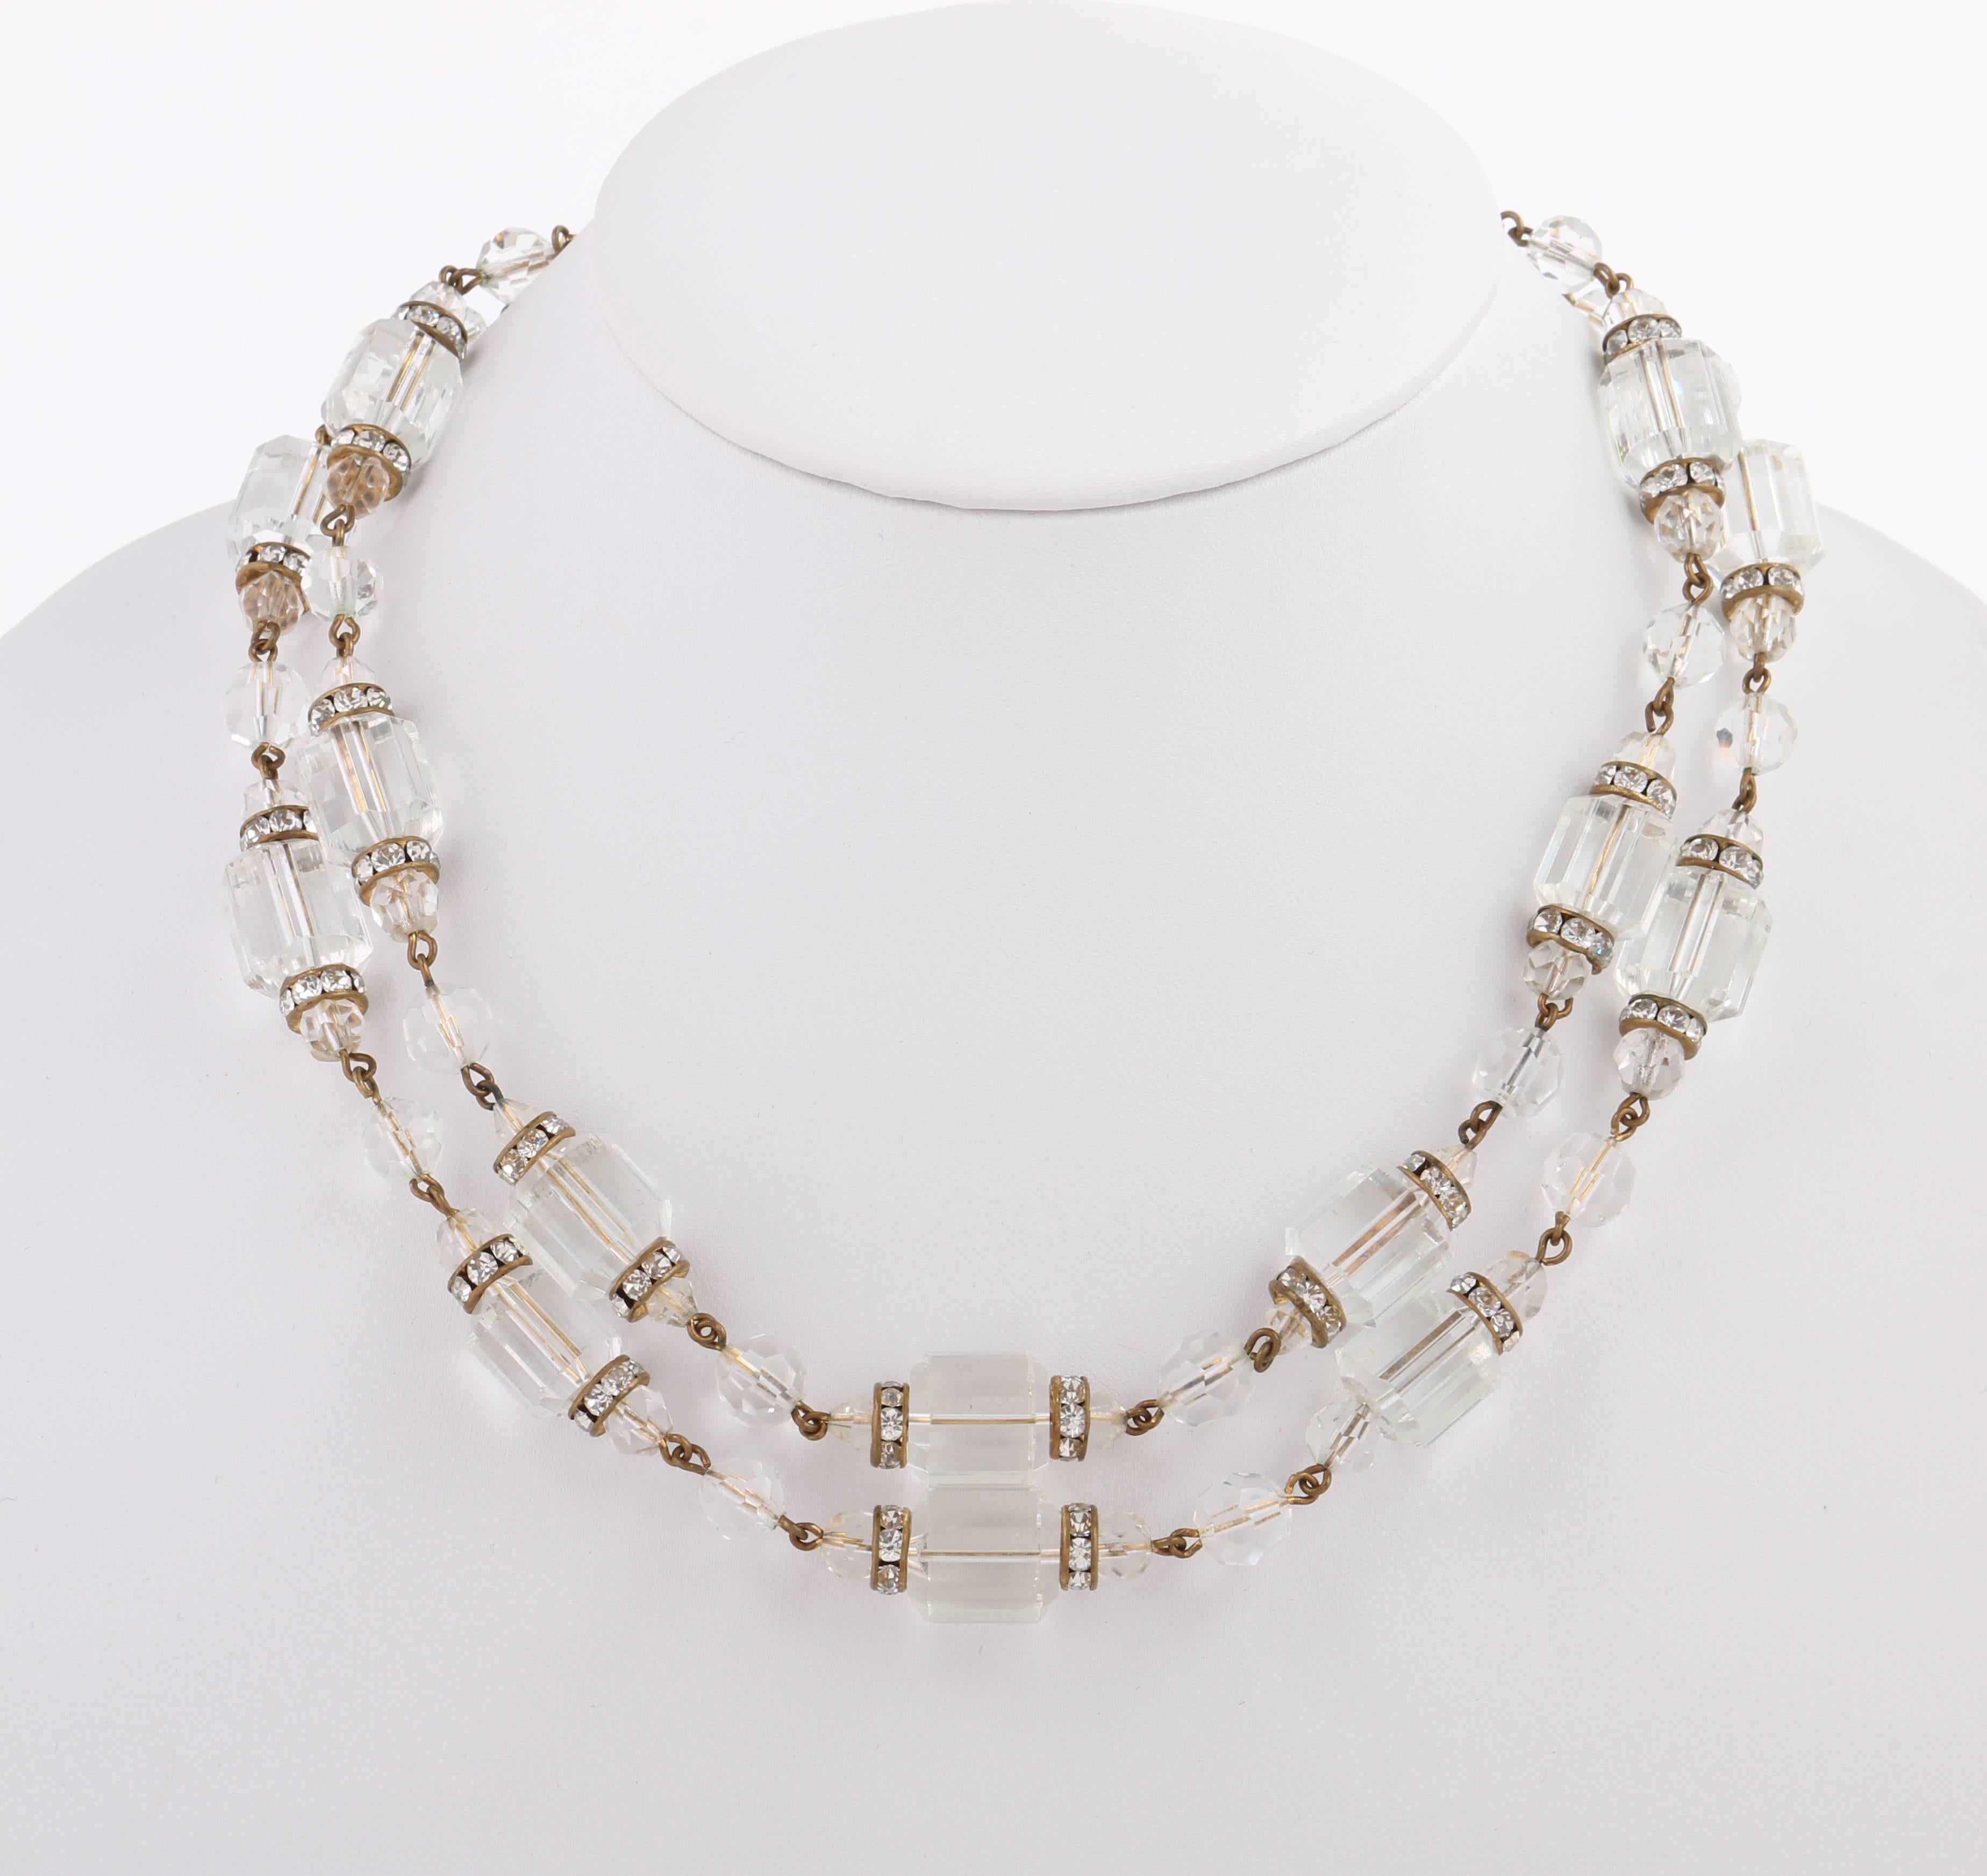 Vintage Freirich c.1960's clear barrel cut crystal beaded double strand choker necklace. Designed by Solomon Freirich. Two beaded strands made up of crystal clear faceted glass barrel beads (14 mm) set between rhinestone set spacer discs (3 mm) and